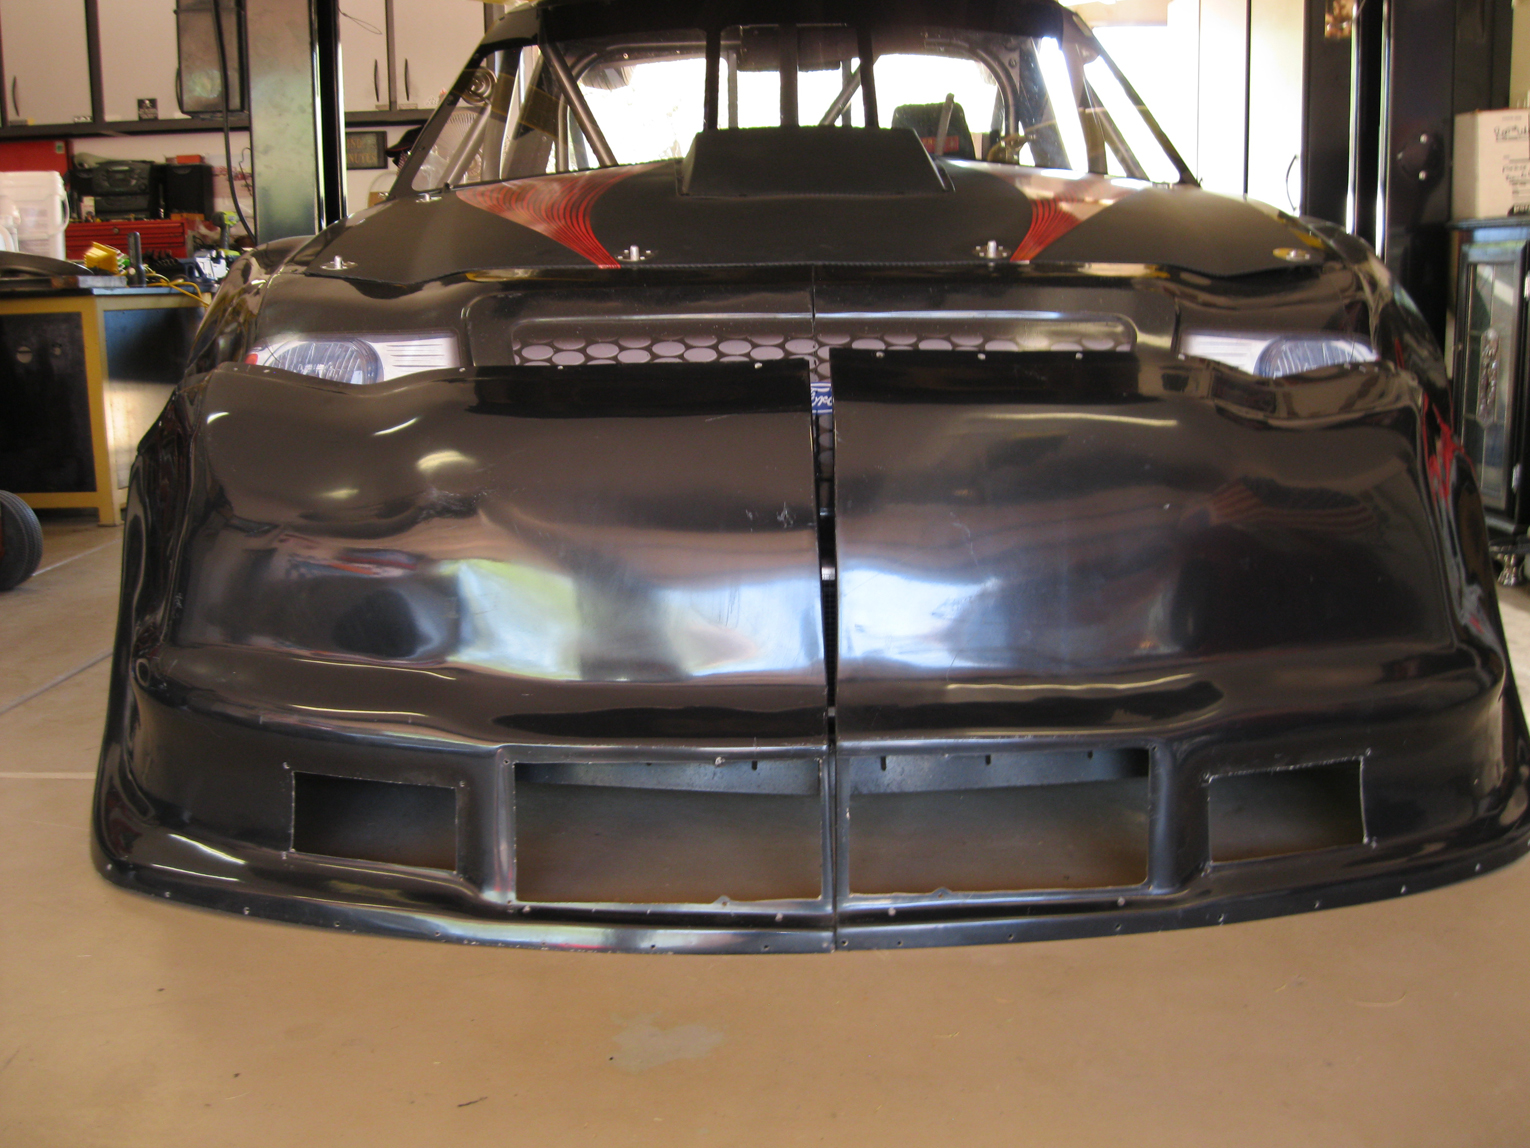 Chevy complete nose section